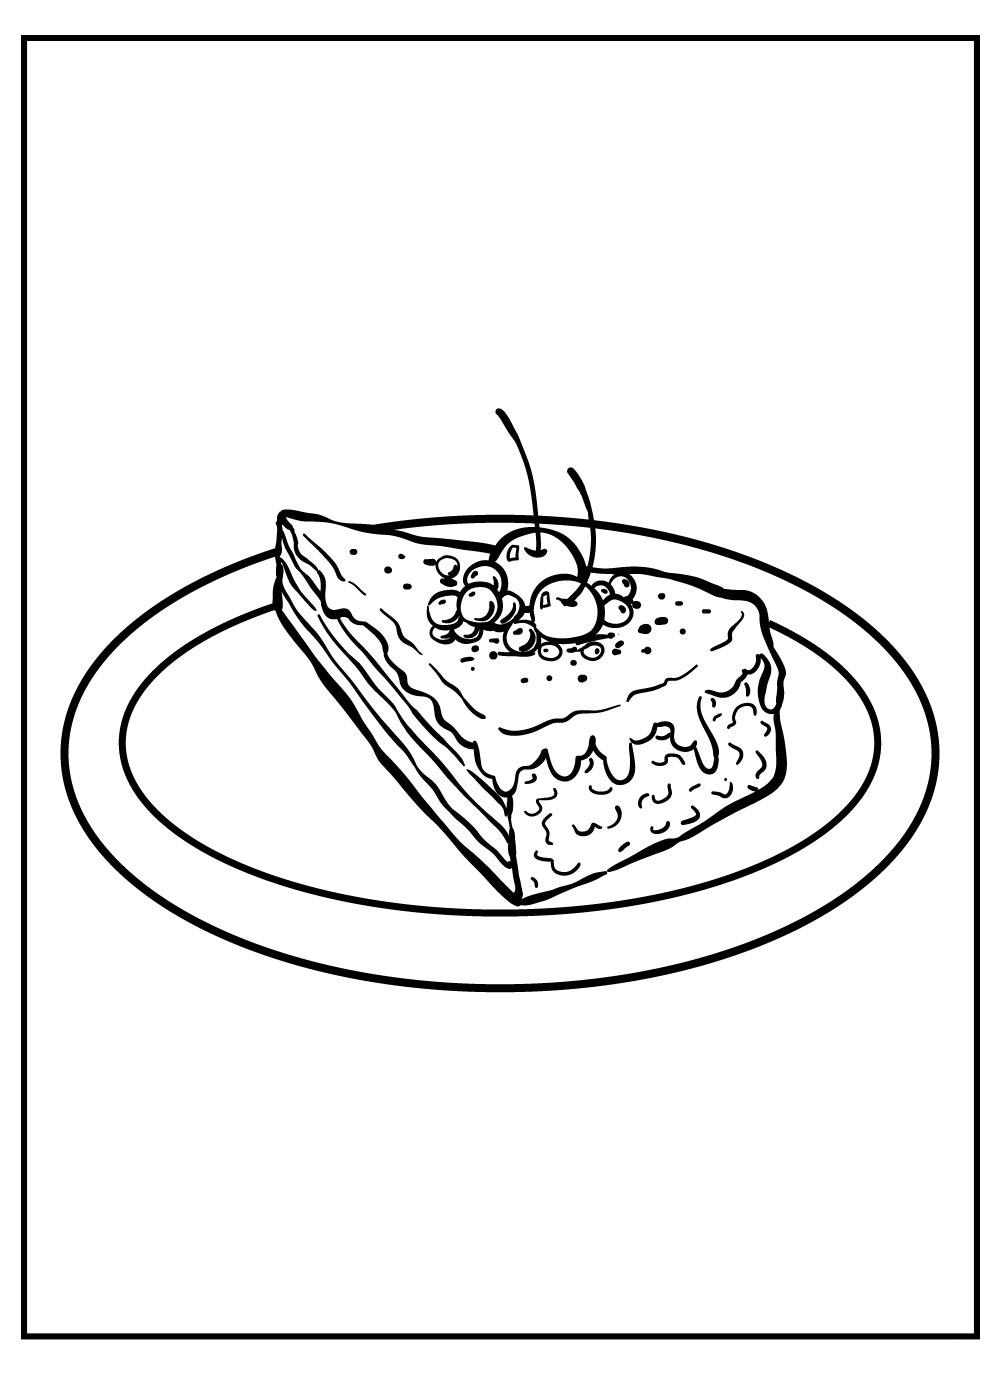 Eating Birthday Cake Coloring Page